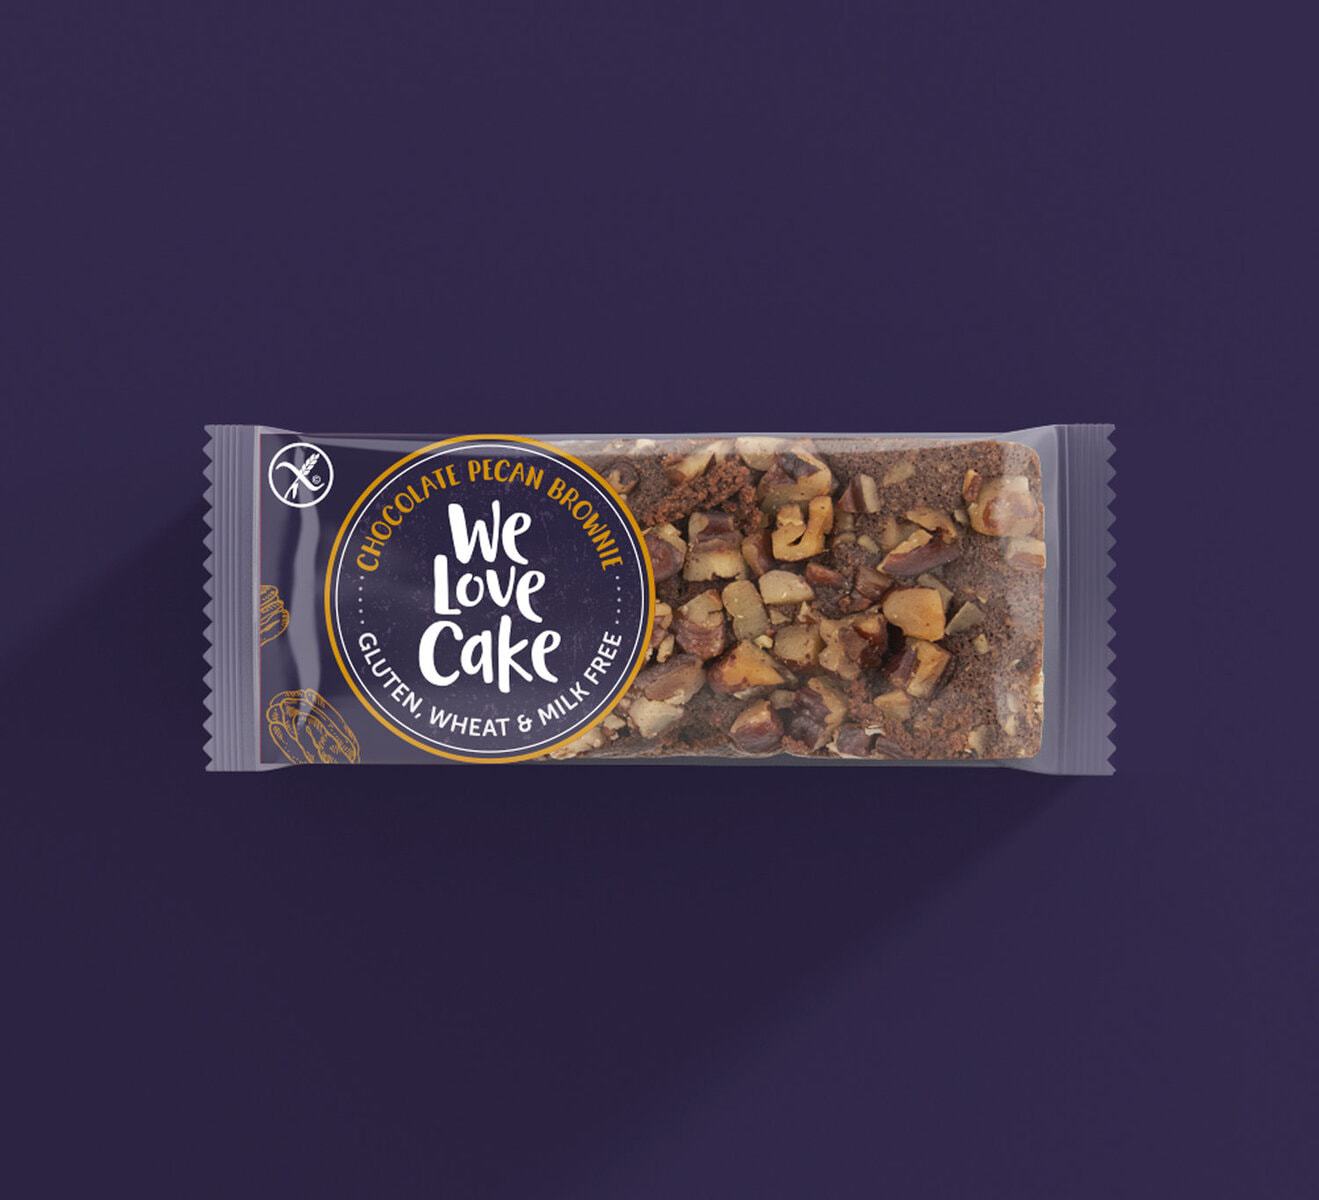 Rebrand and Packaging Design for We Love Cake